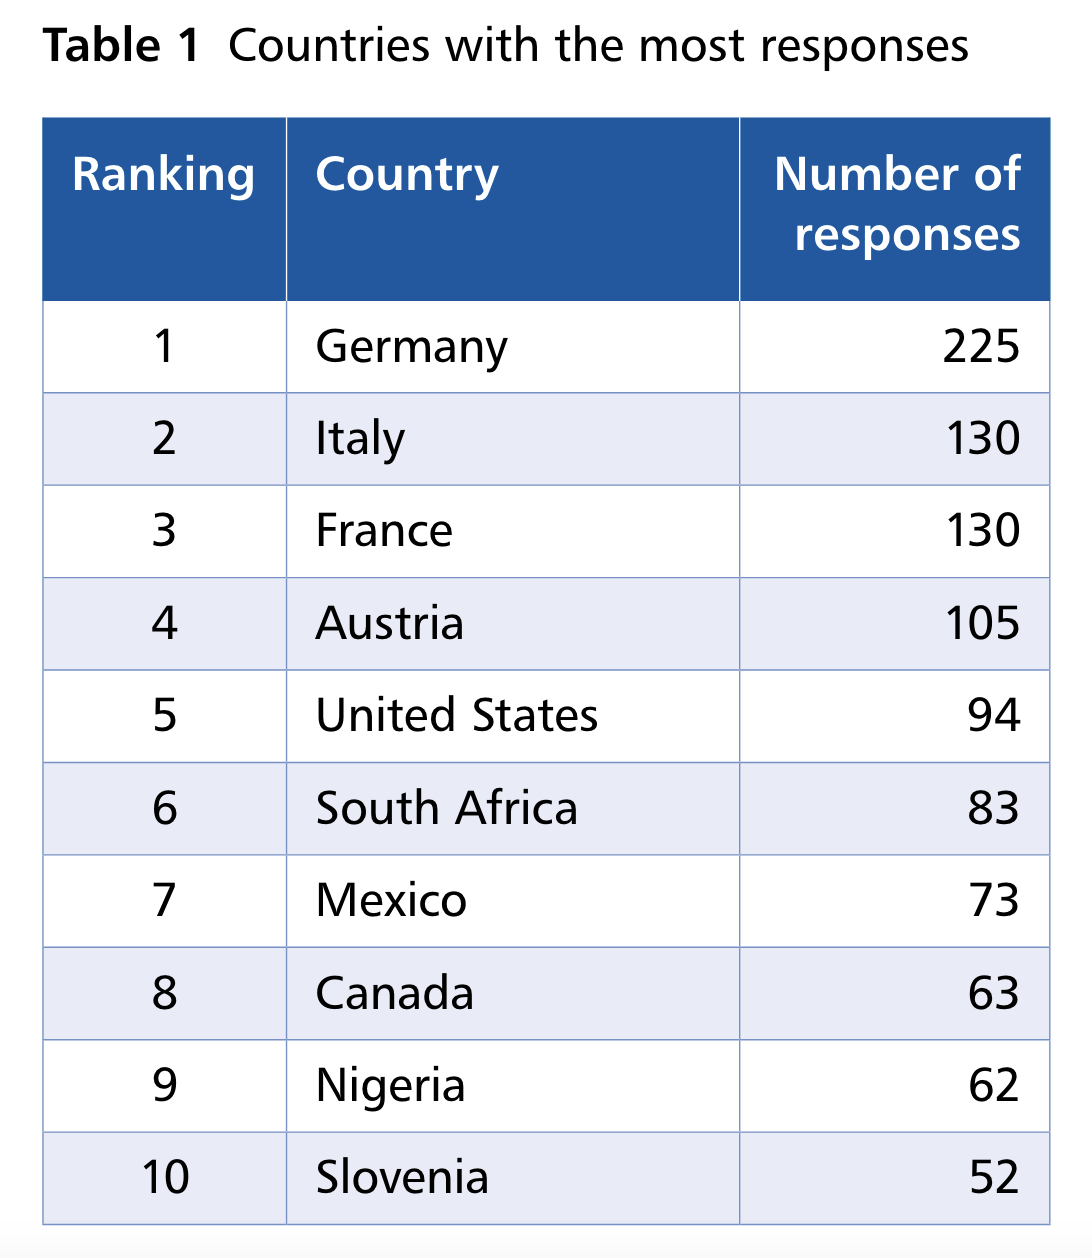 Table 1: Countries with the most responses